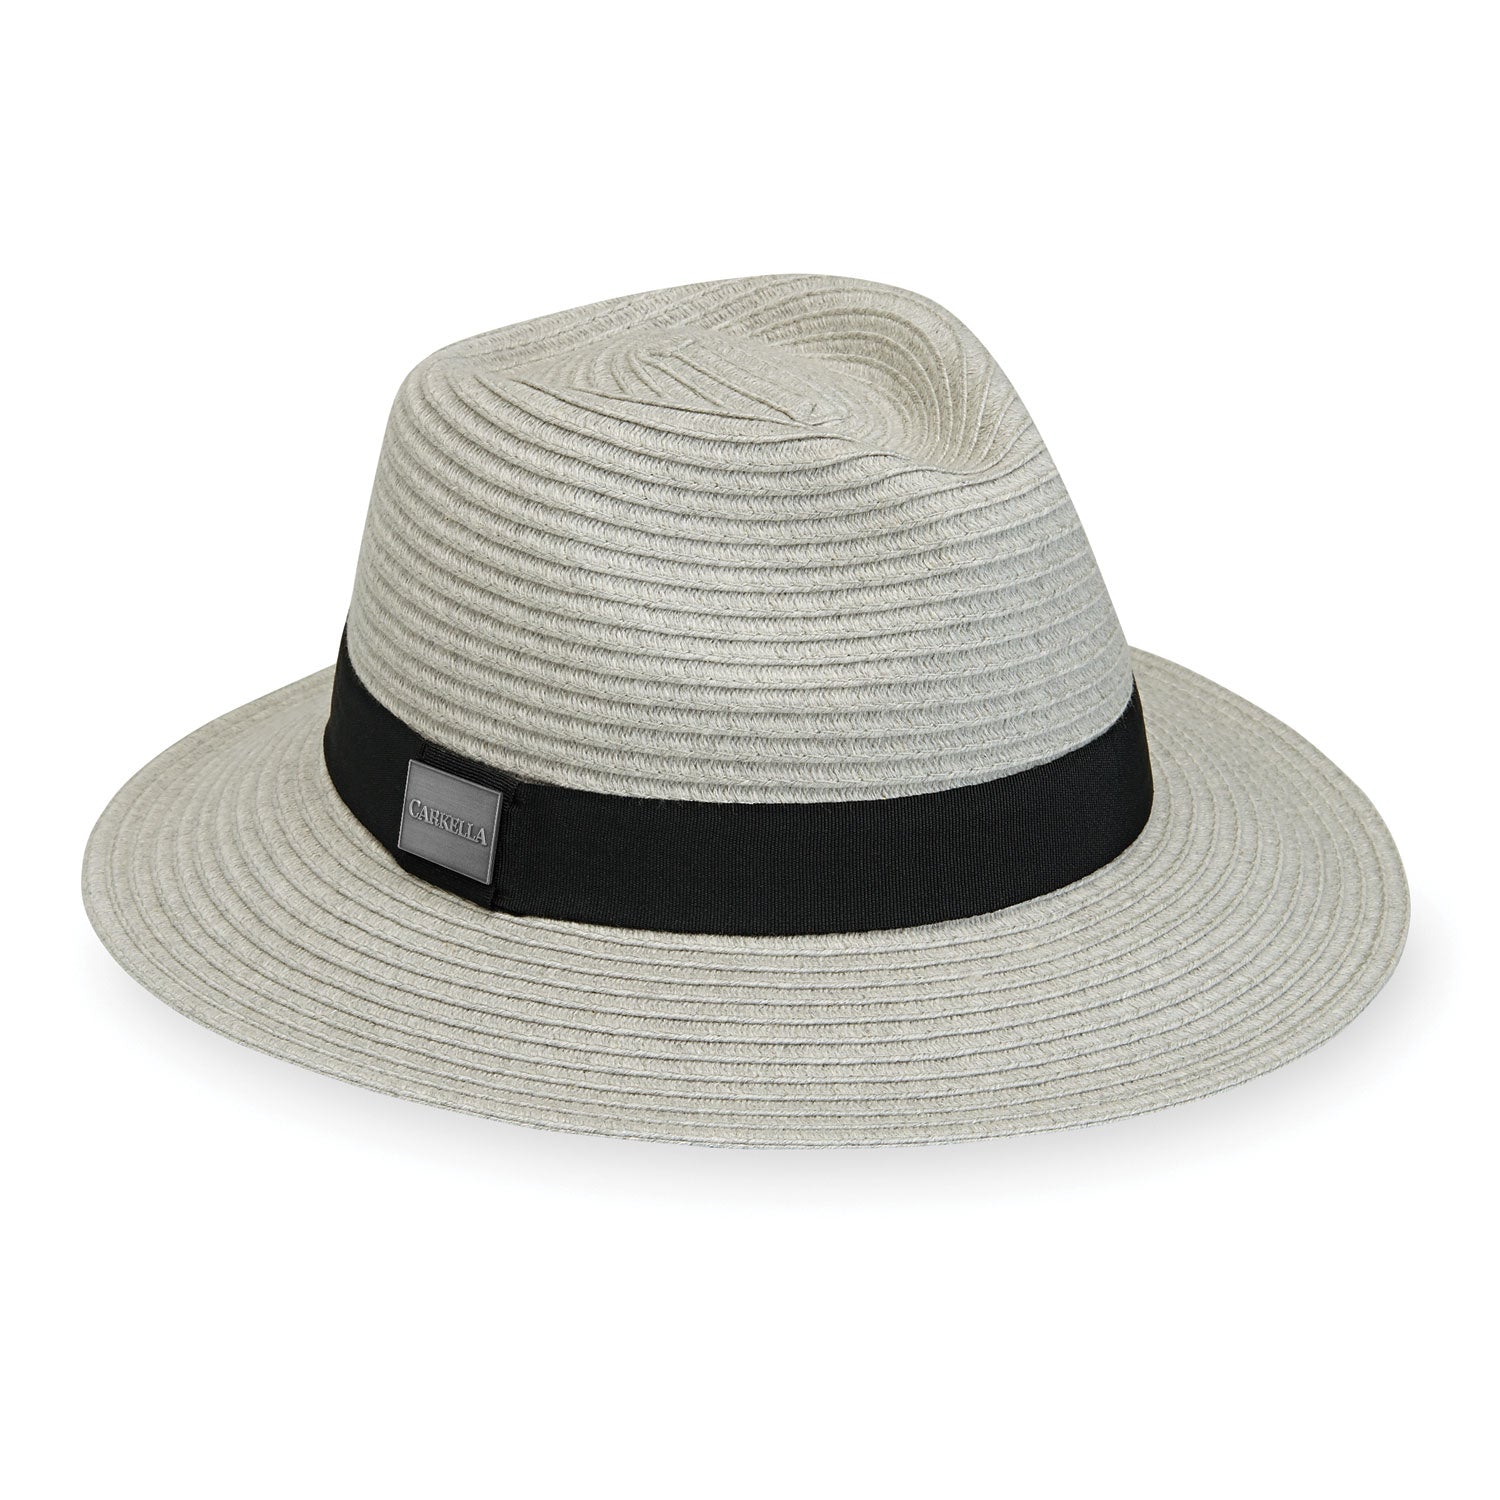 Featuring Front of Unisex Fedora Style Fairway Packable UPF Sun Hat in Light Grey from Carkella by Wallaroo